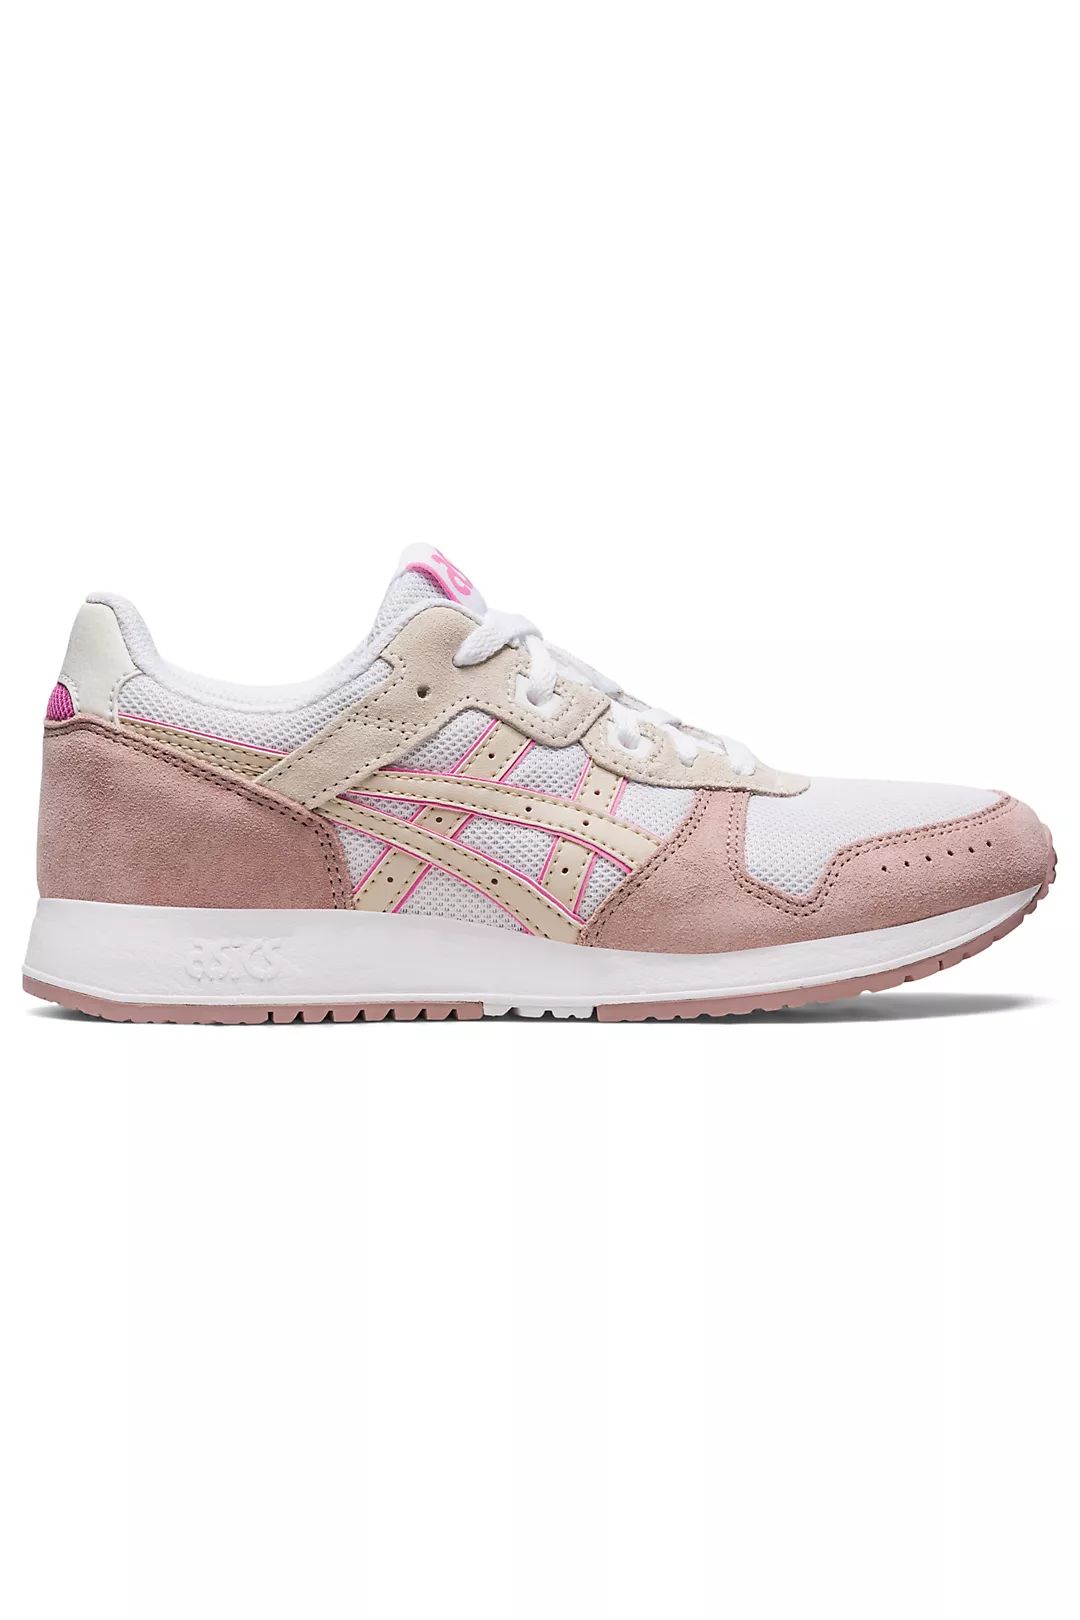 ASICS  Lyte Classic Sportstyle Sneakers | Anthropologie (US)